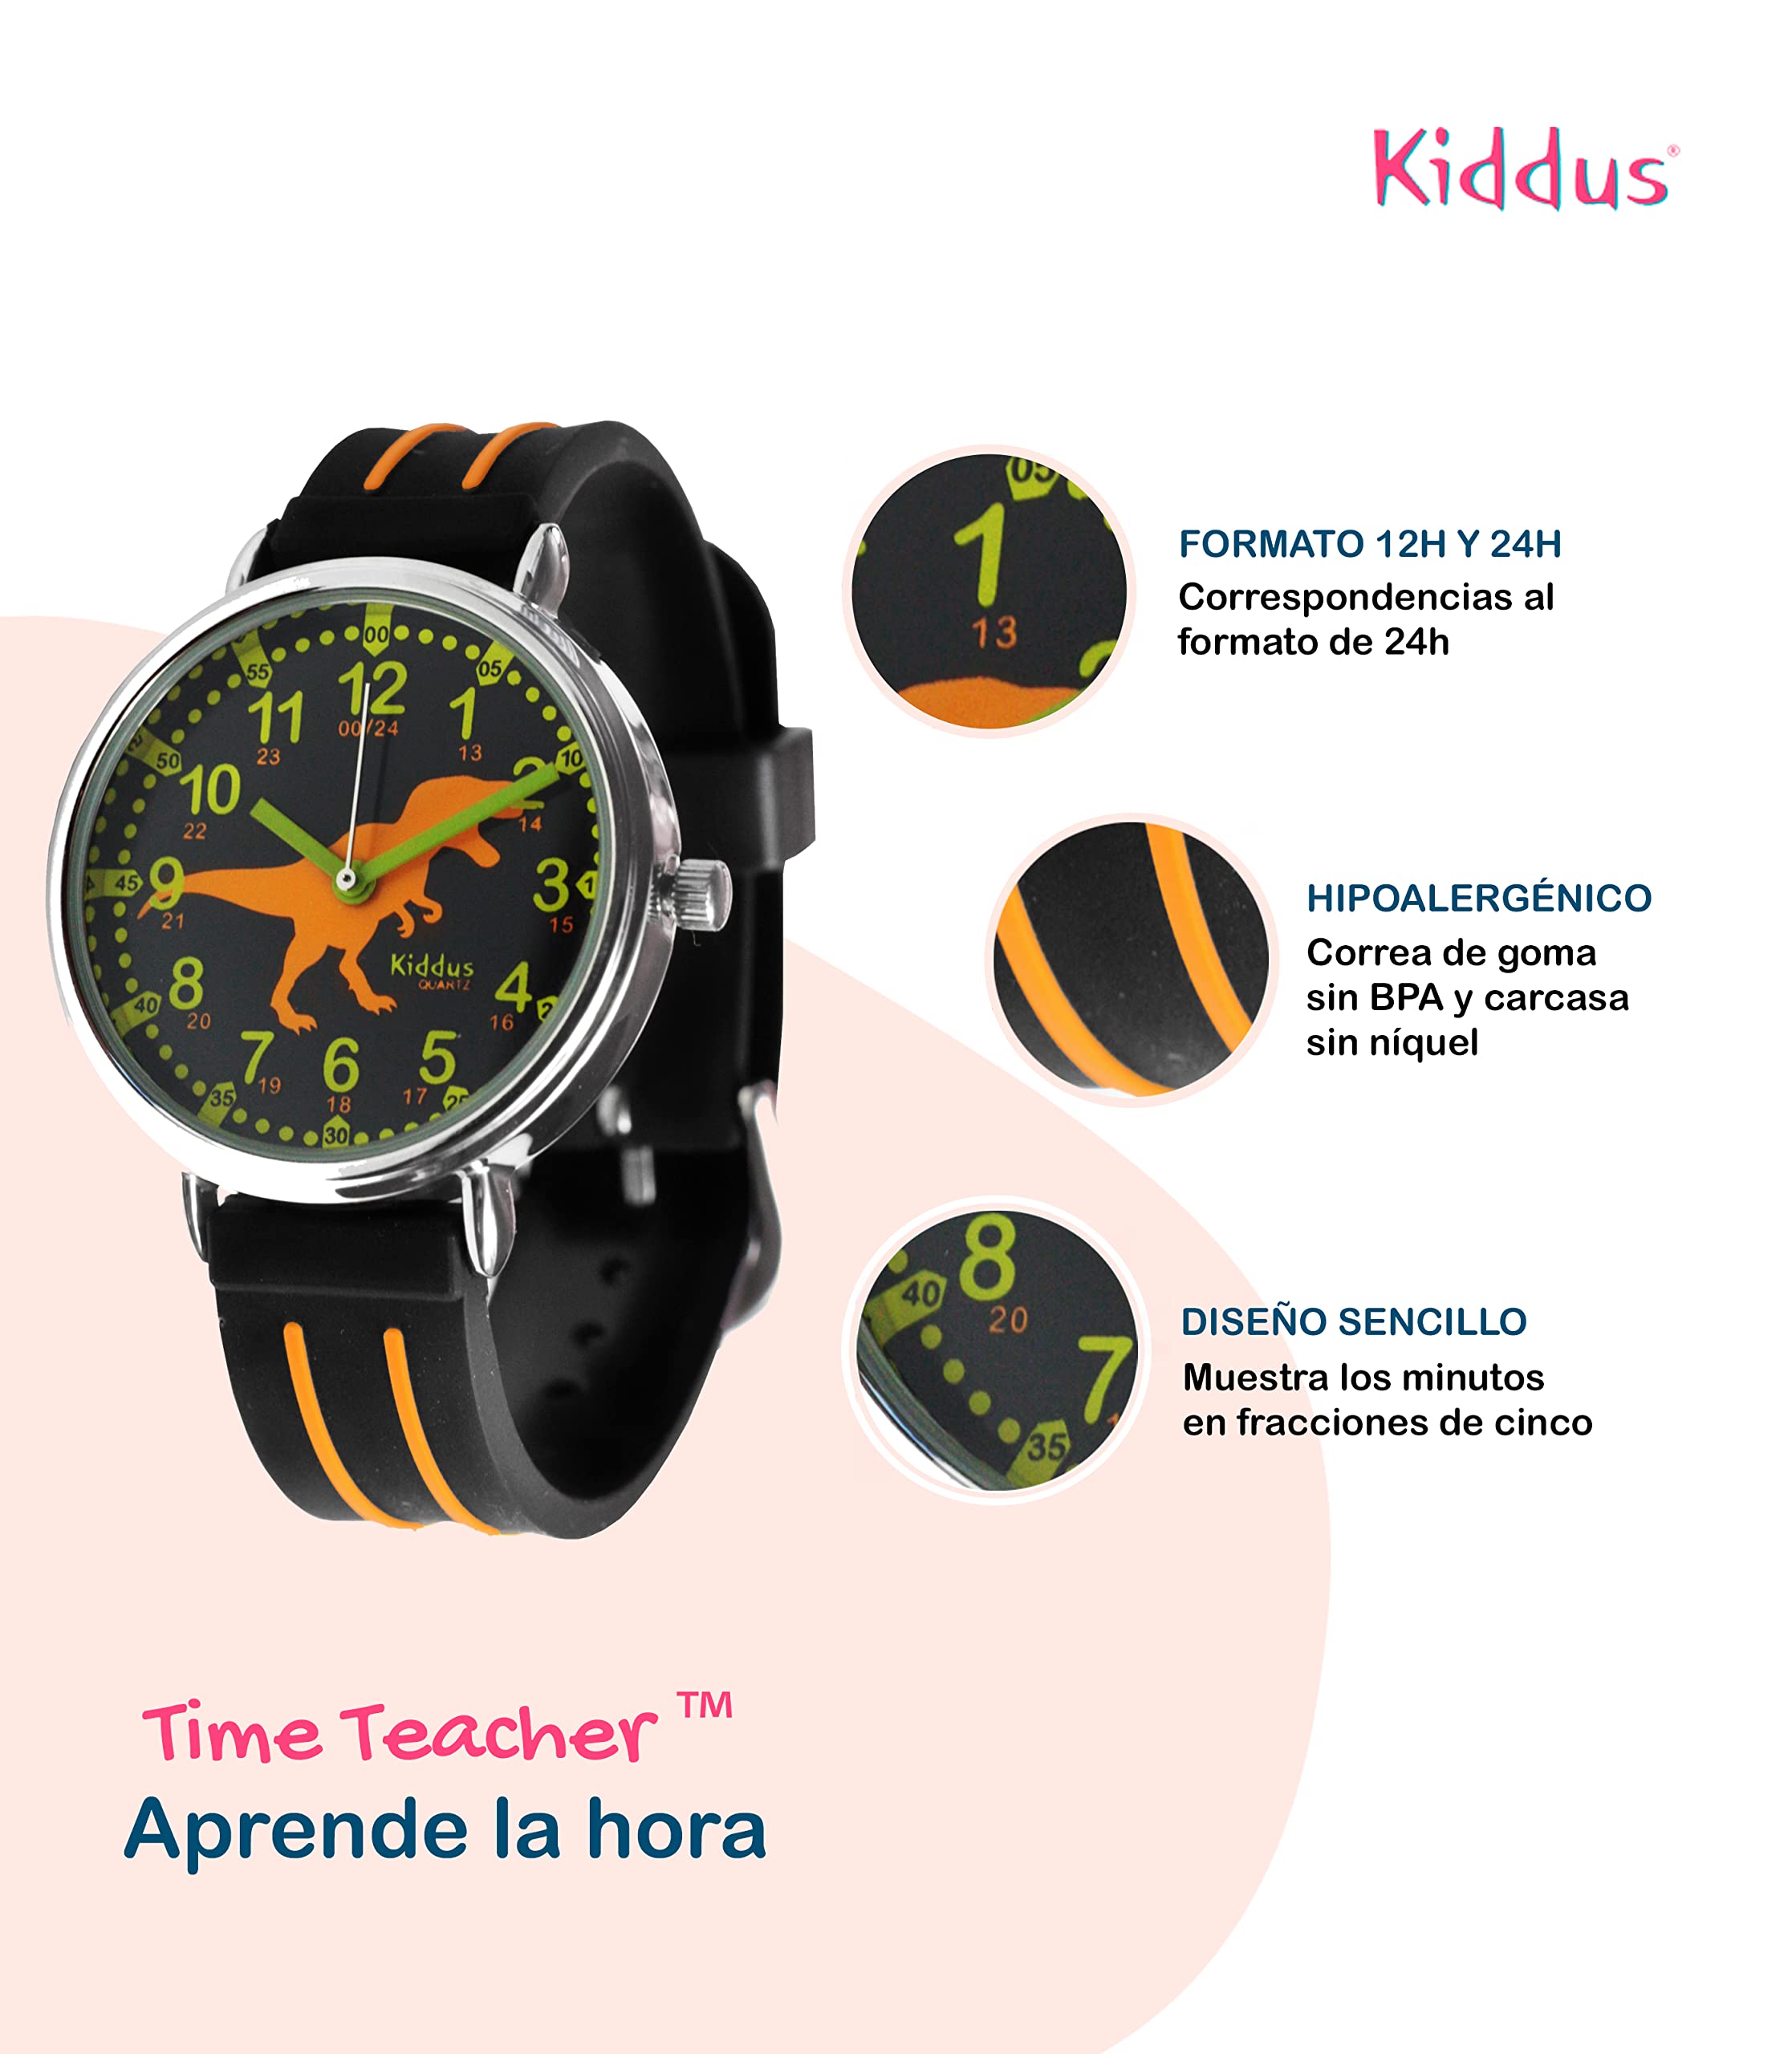 Kiddus Educational Kids Watch for Children Boy and Girl. Analogue Time Teacher Wristwatch with Exercises. Japanese Quartz Movement. Easy to Read and Learn The time